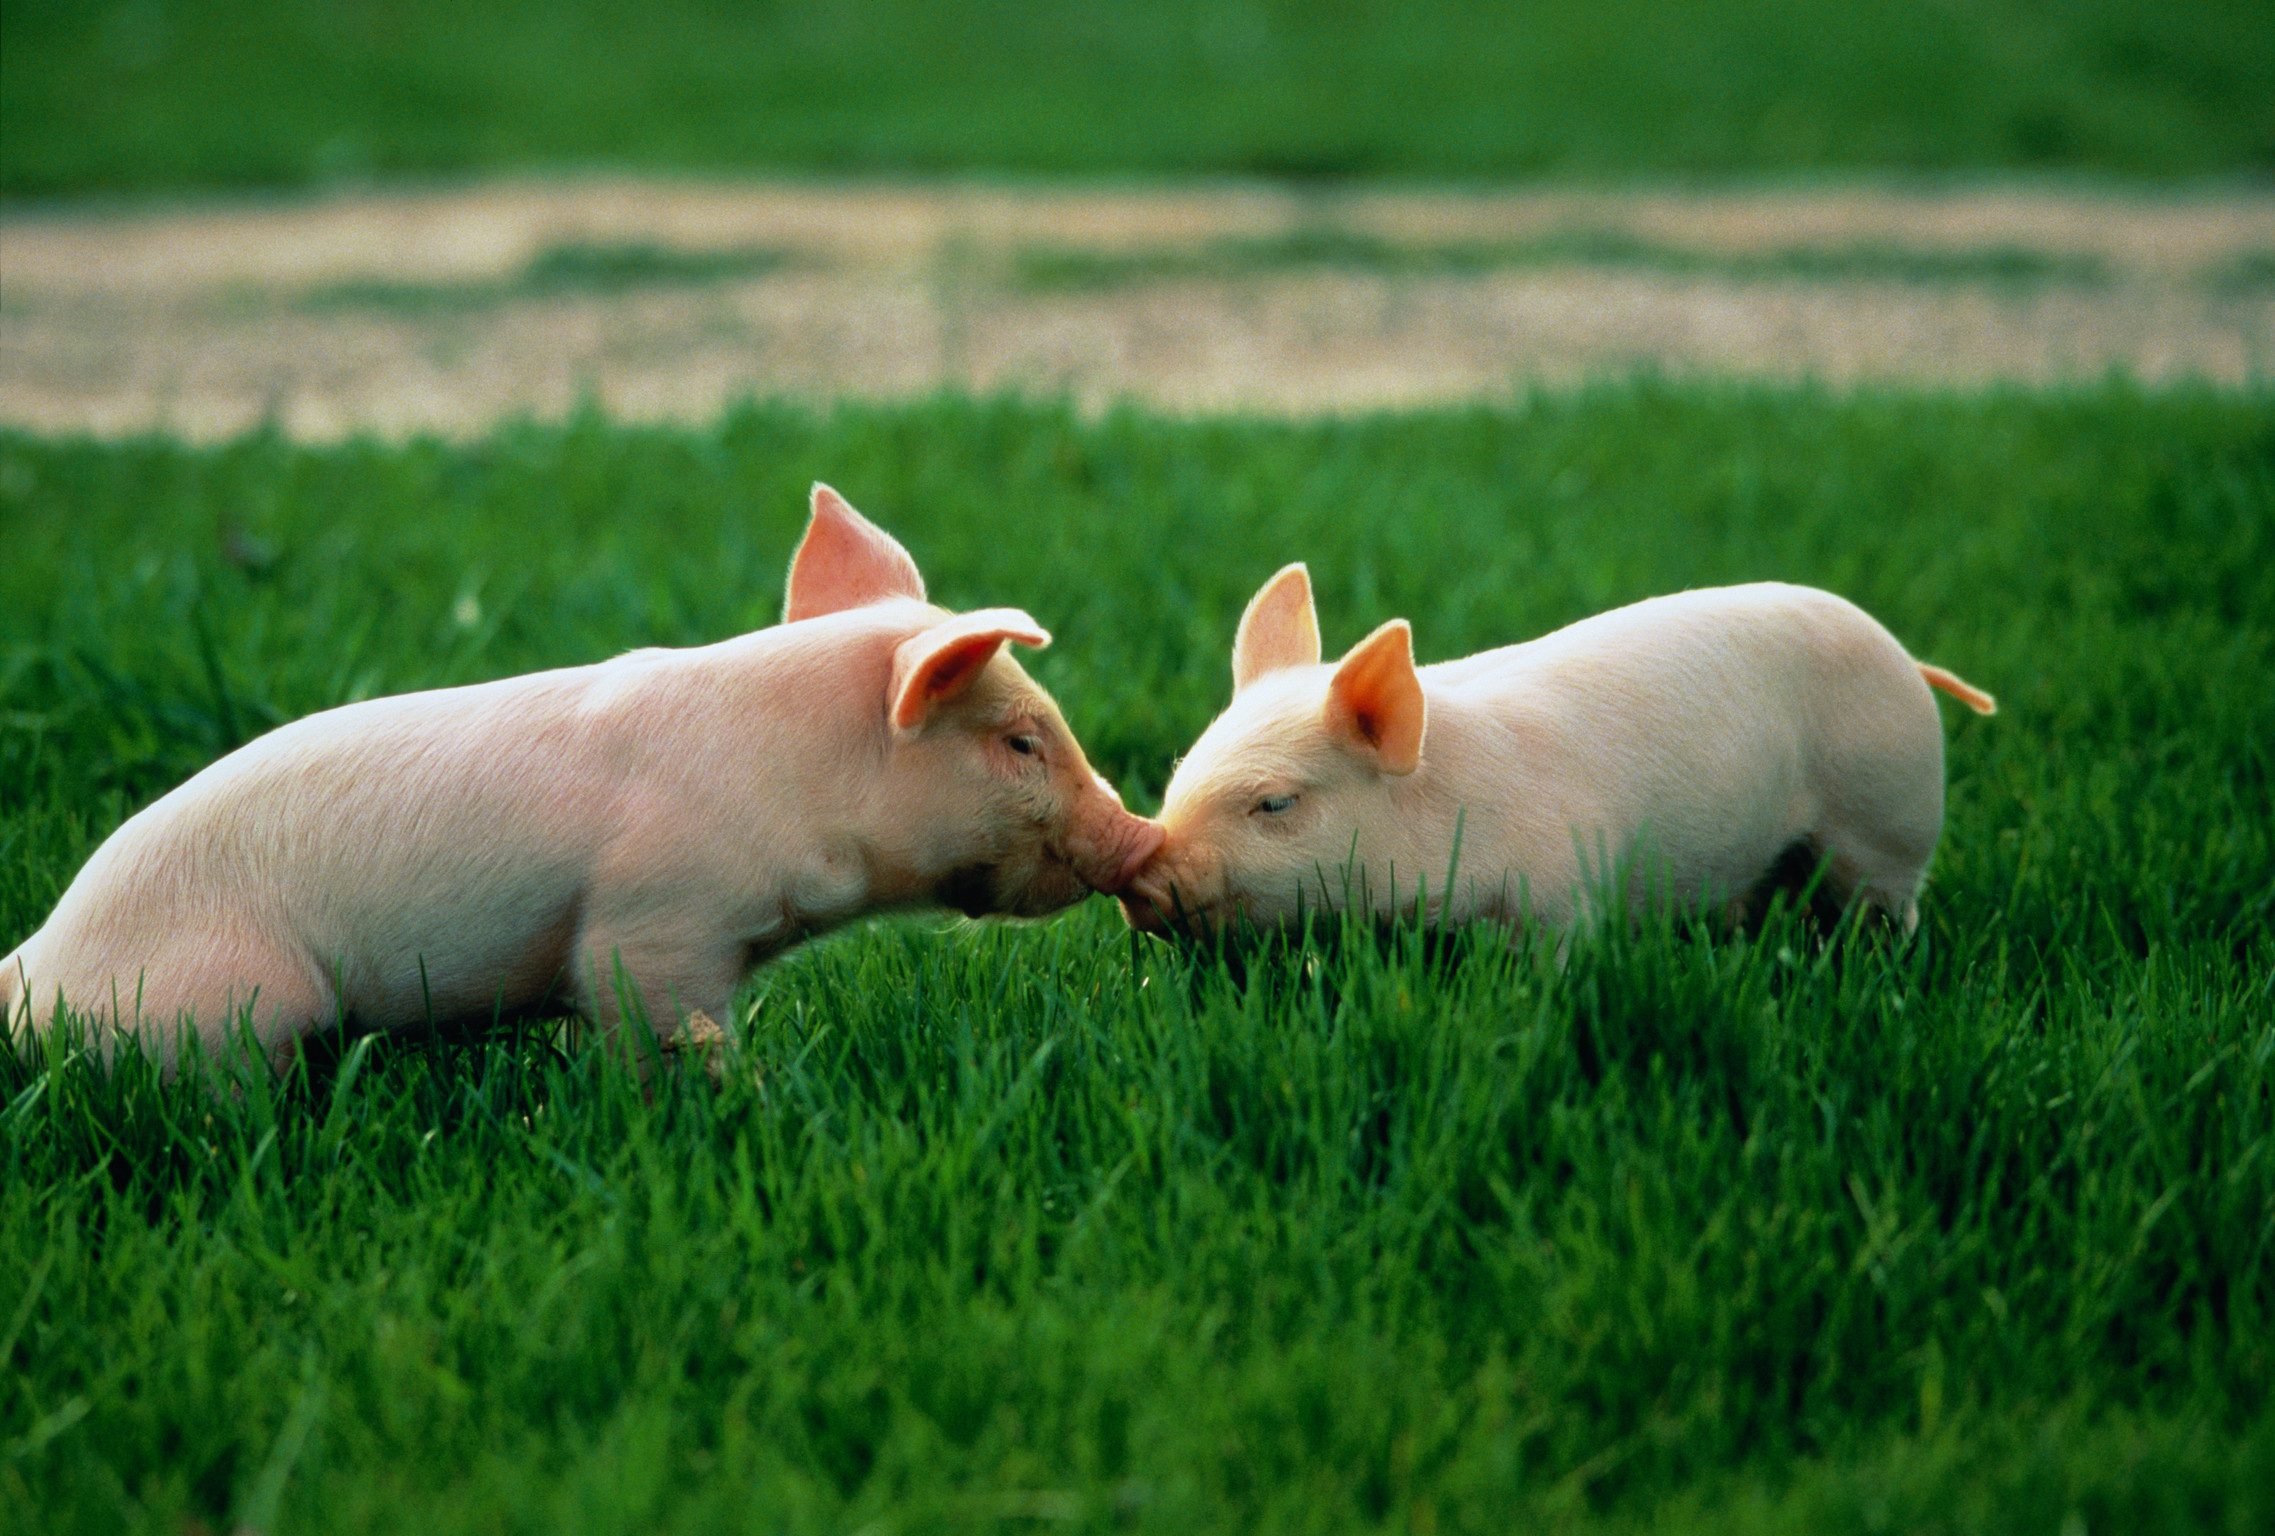 Two piglets in a field touching noses